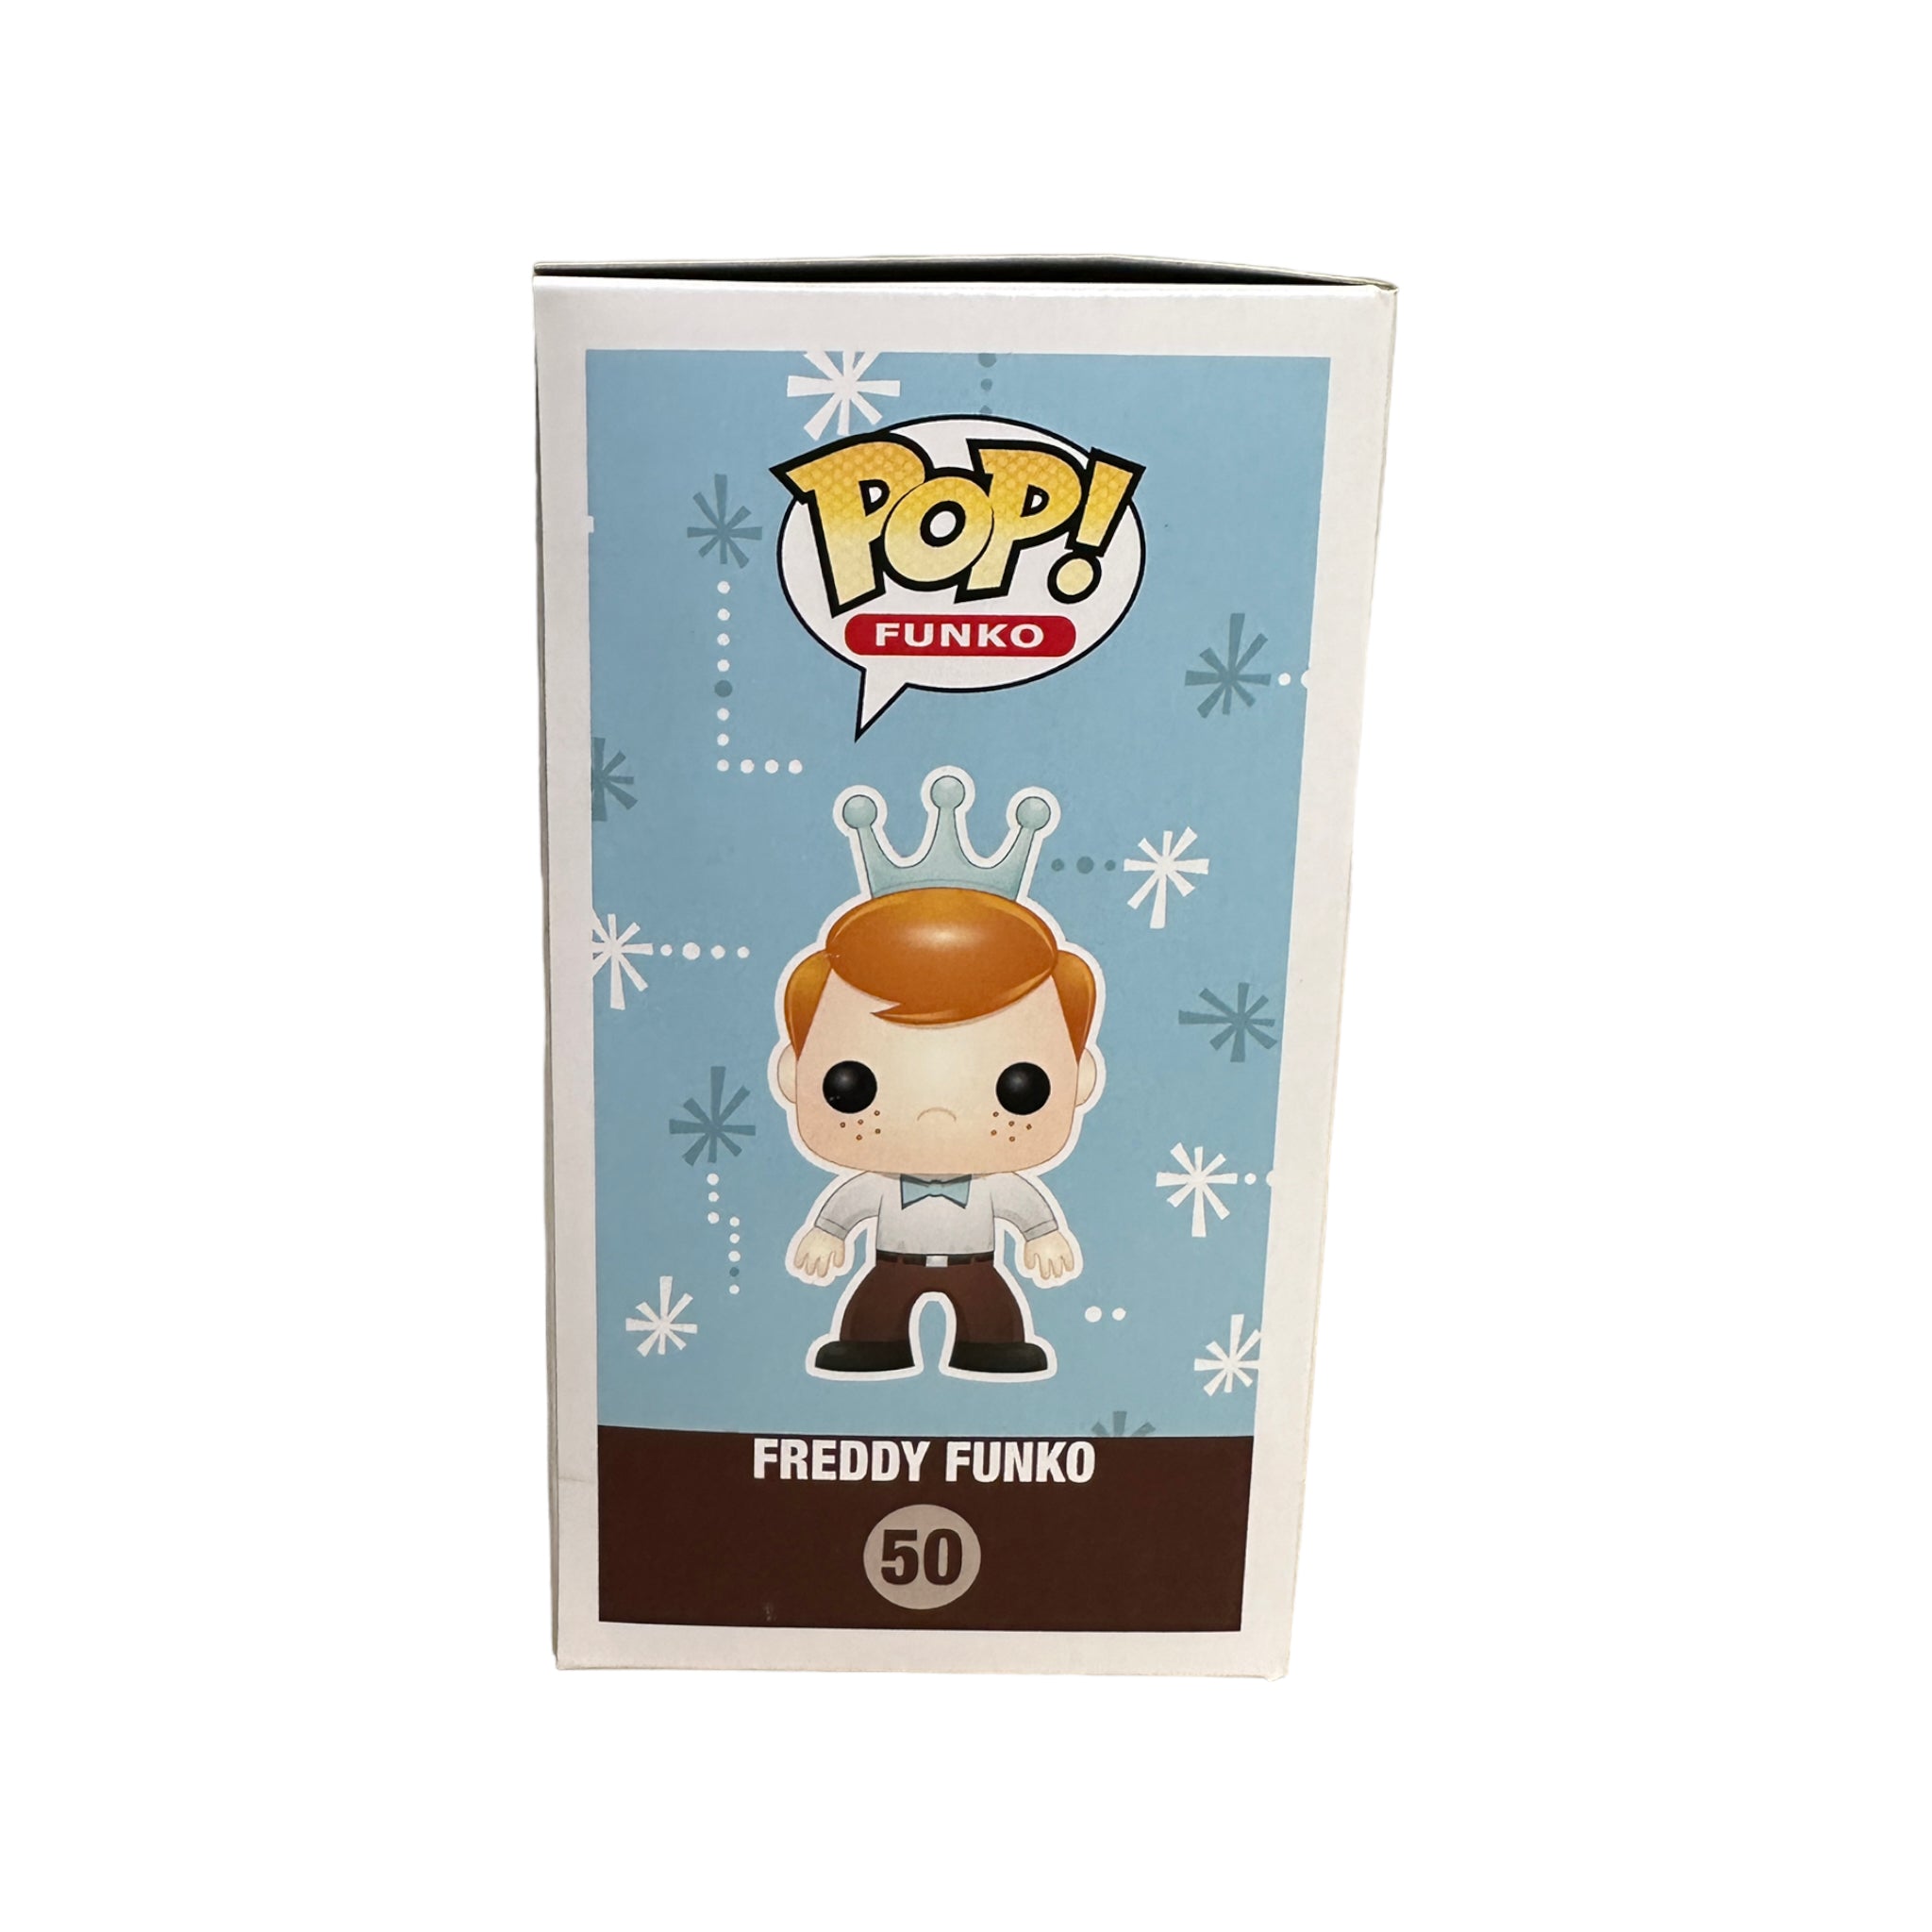 Freddy Funko as Willy Wonka #50 Funko Pop! - SDCC 2016 Exclusive LE500 Pcs - Condition 8.75/10